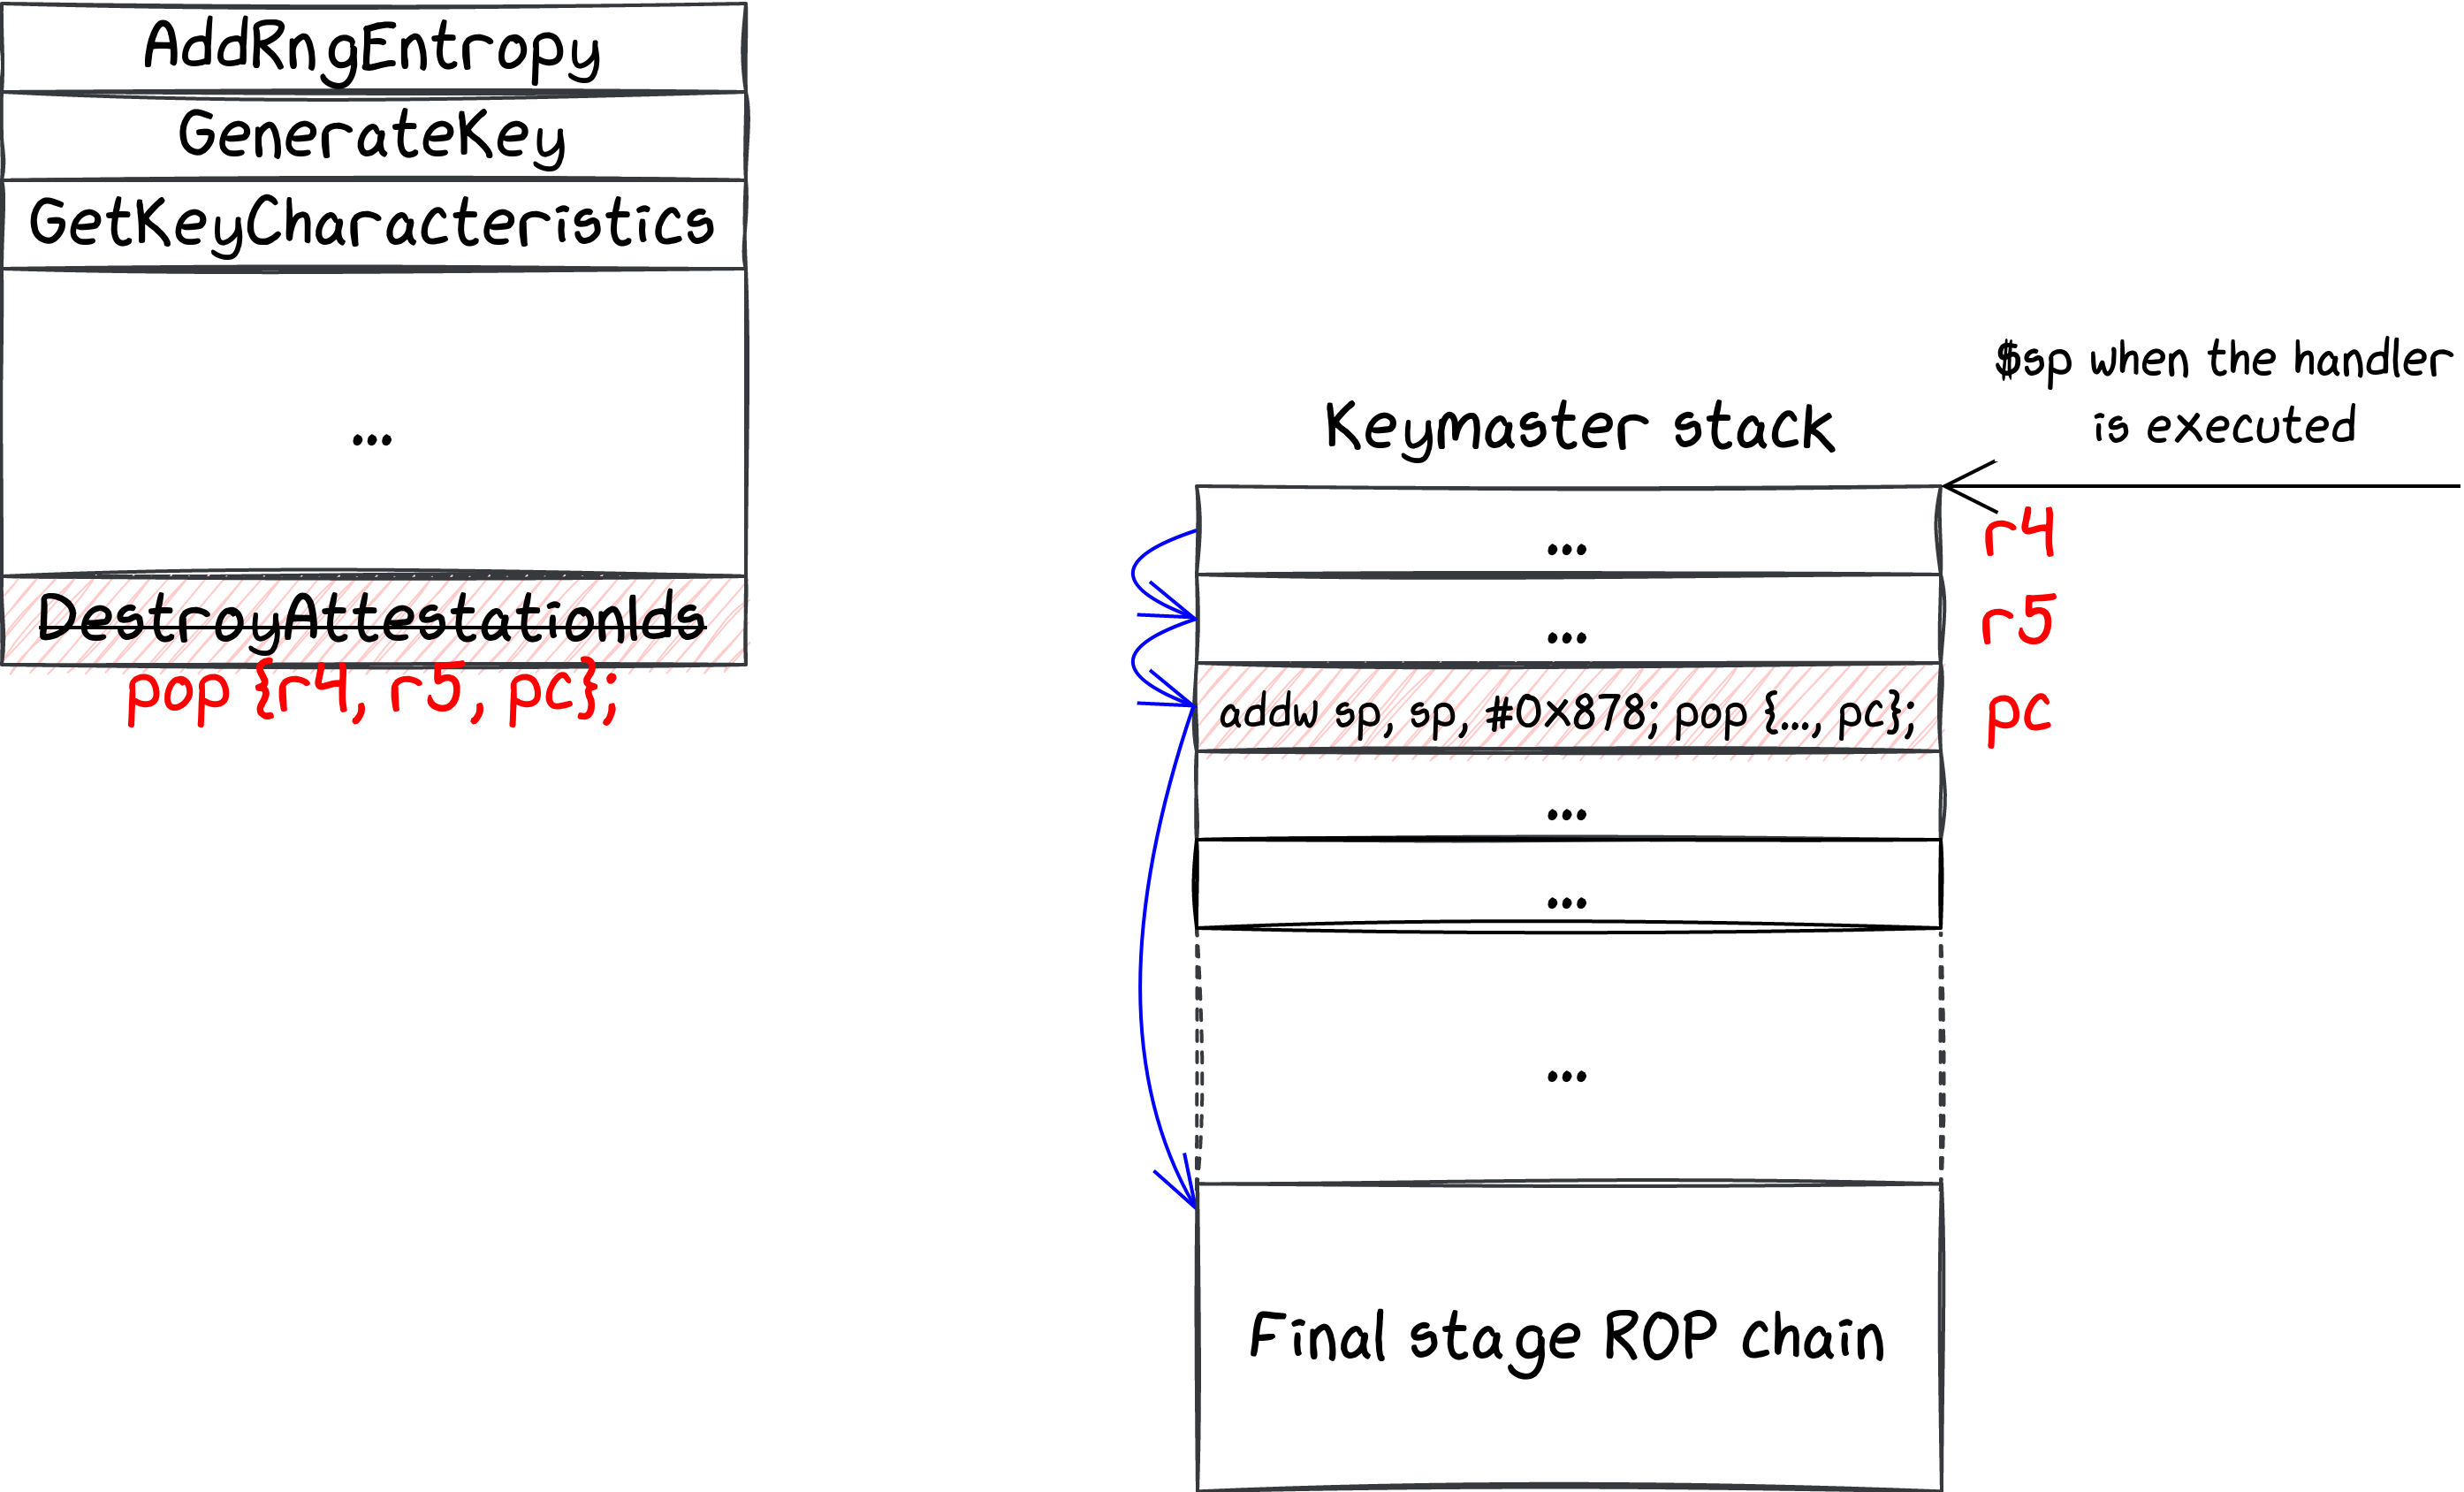 The final stage of the exploit: executing the overwritten handler and jumping to the final ROP chain